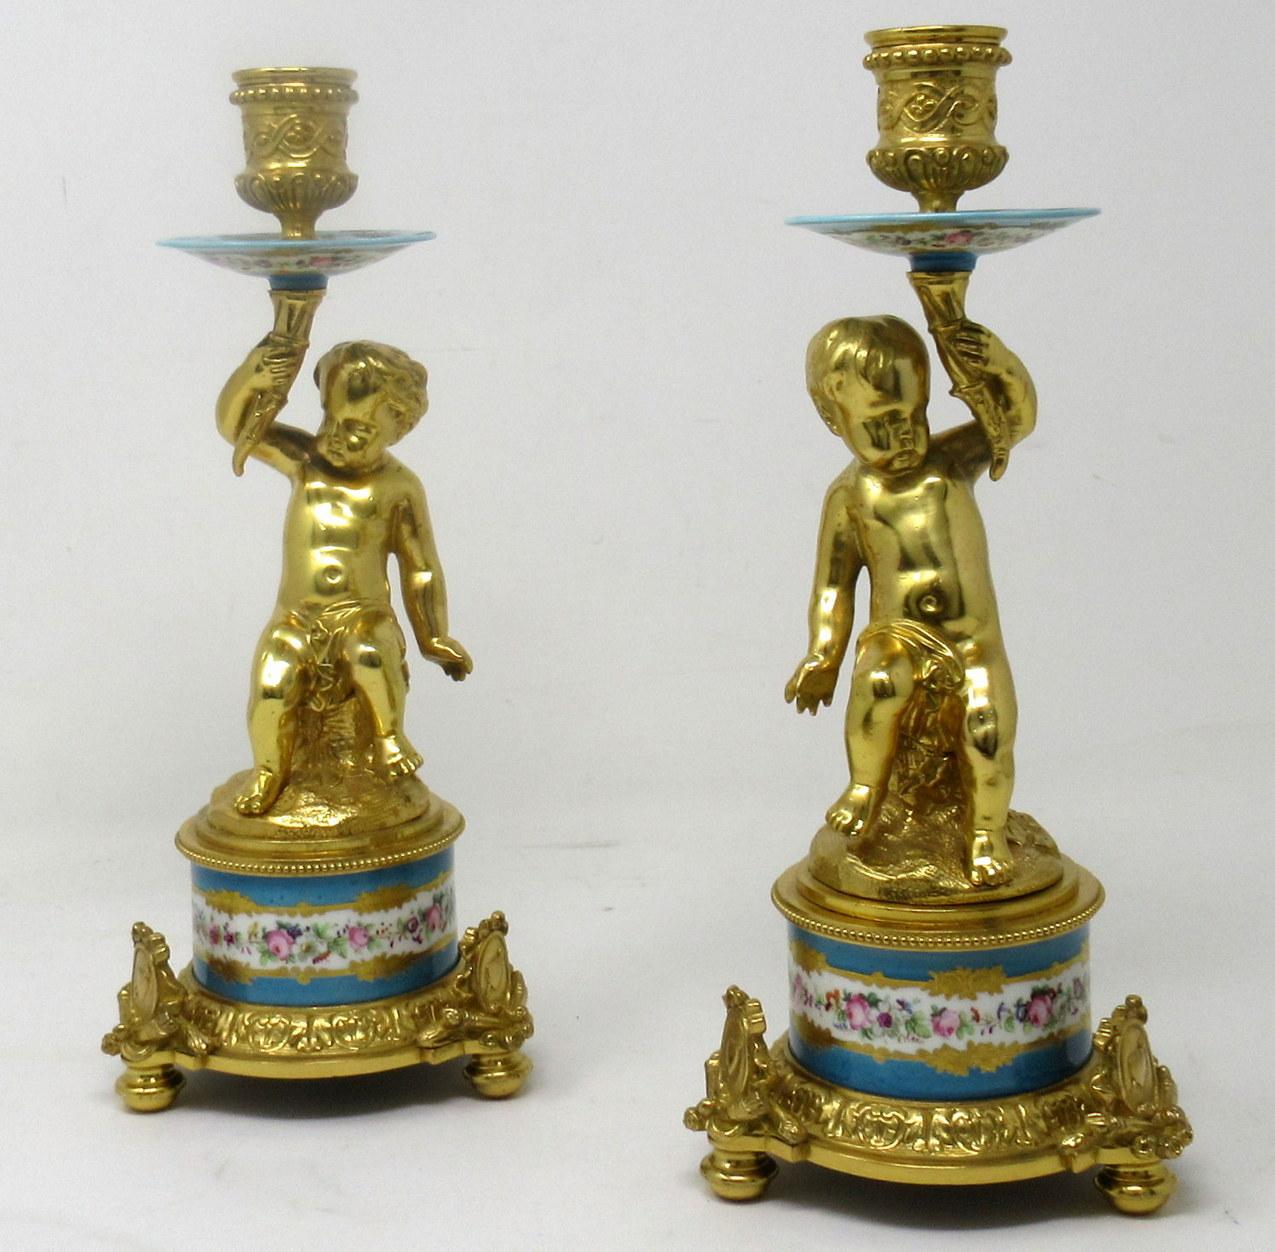 A fine pair of stylish and imposing French ormolu & sevres porcelain heavy gauge single light candlesticks of outstanding quality and of compact proportions. Last half of the nineteenth century. 

Each central support modelled as a Cherub seated